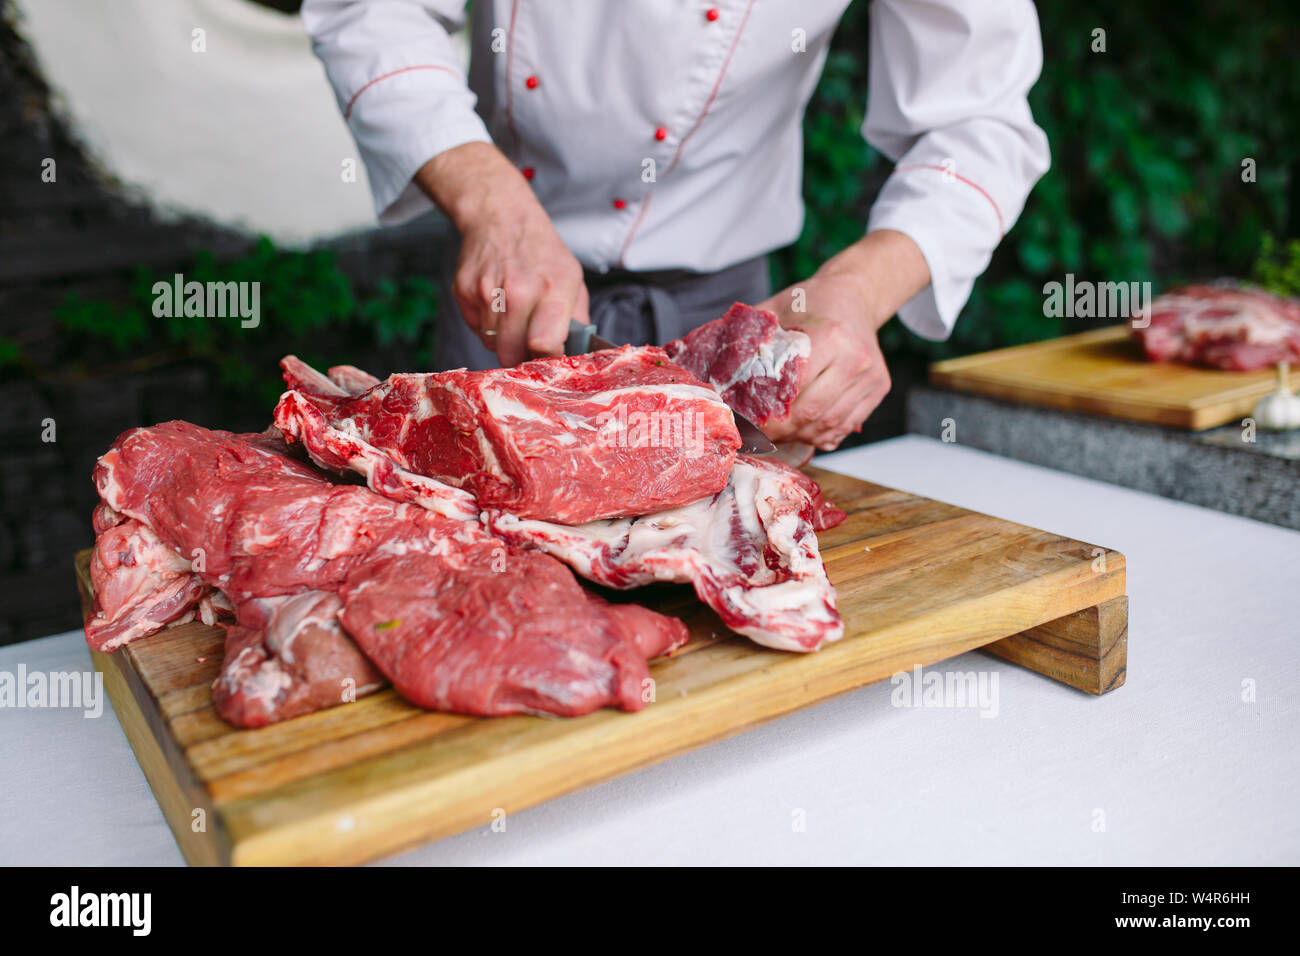 A man cook cuts meat with a knife in a restaurant Stock Photo